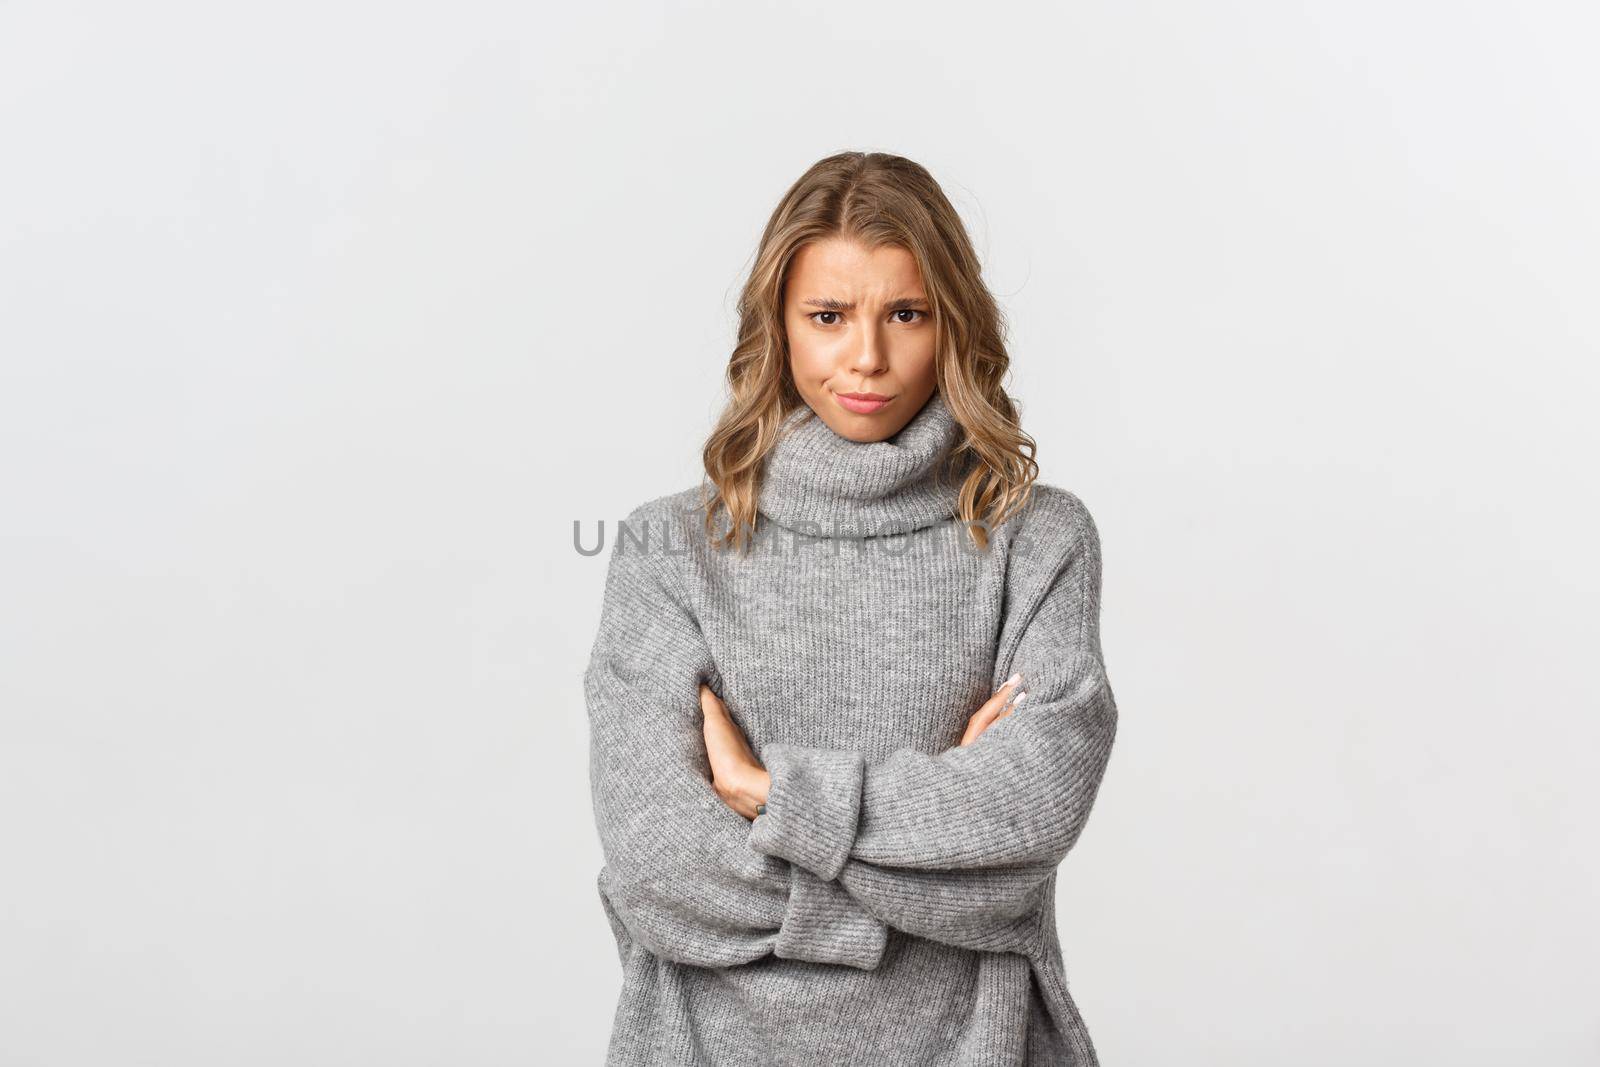 Image of disappointed gloomy girl, frowning and standing defensive, feeling offended or upset, standing over white background.